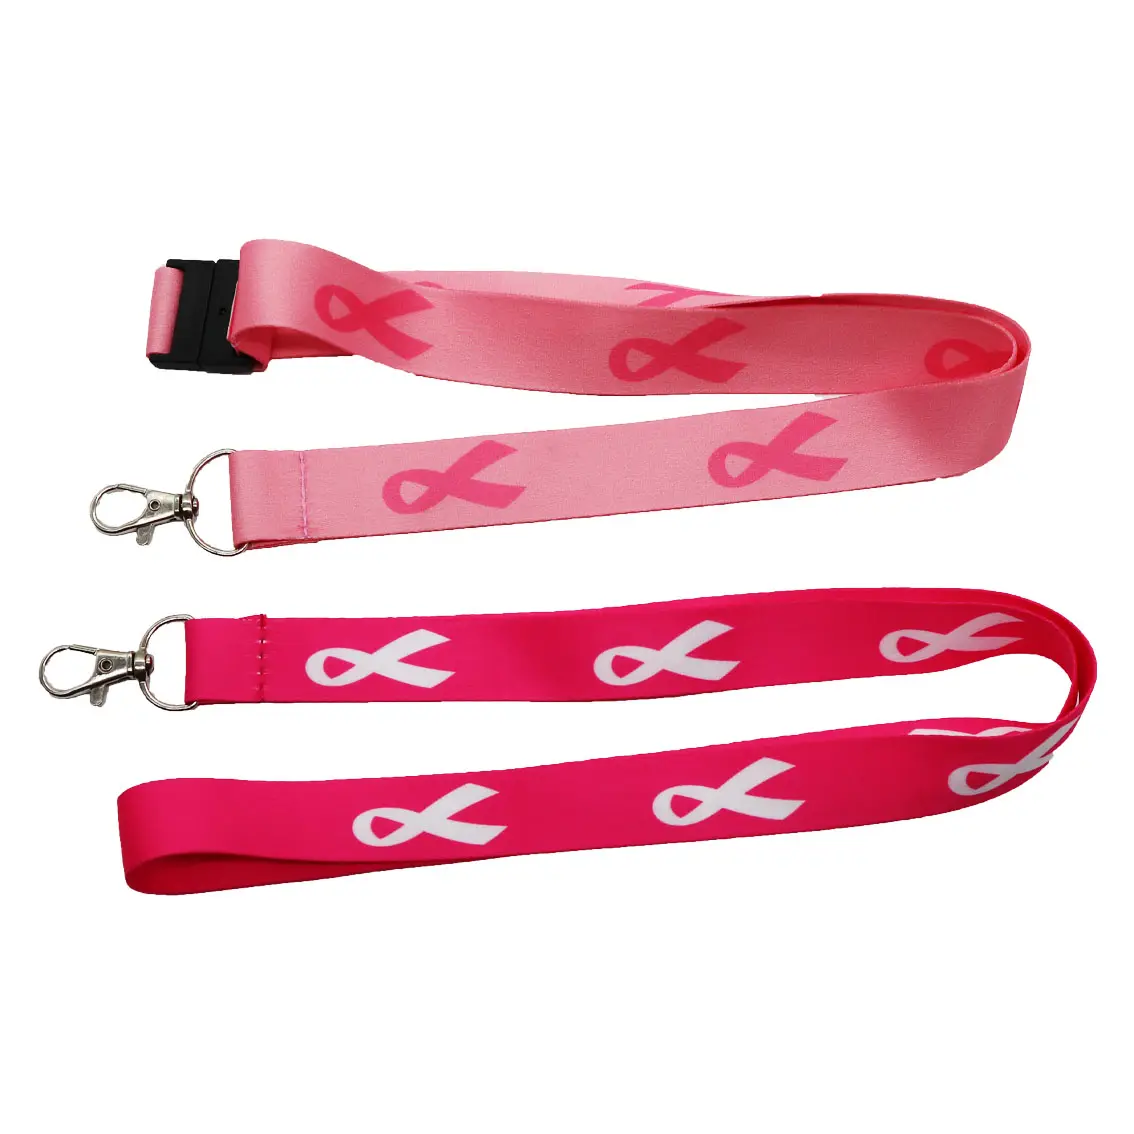 Fast Shipping Breast Cancer Awareness Lanyard Keychain Pink Ribbon Lanyard with Swivel Hook for Key Chain ID Badge Holder